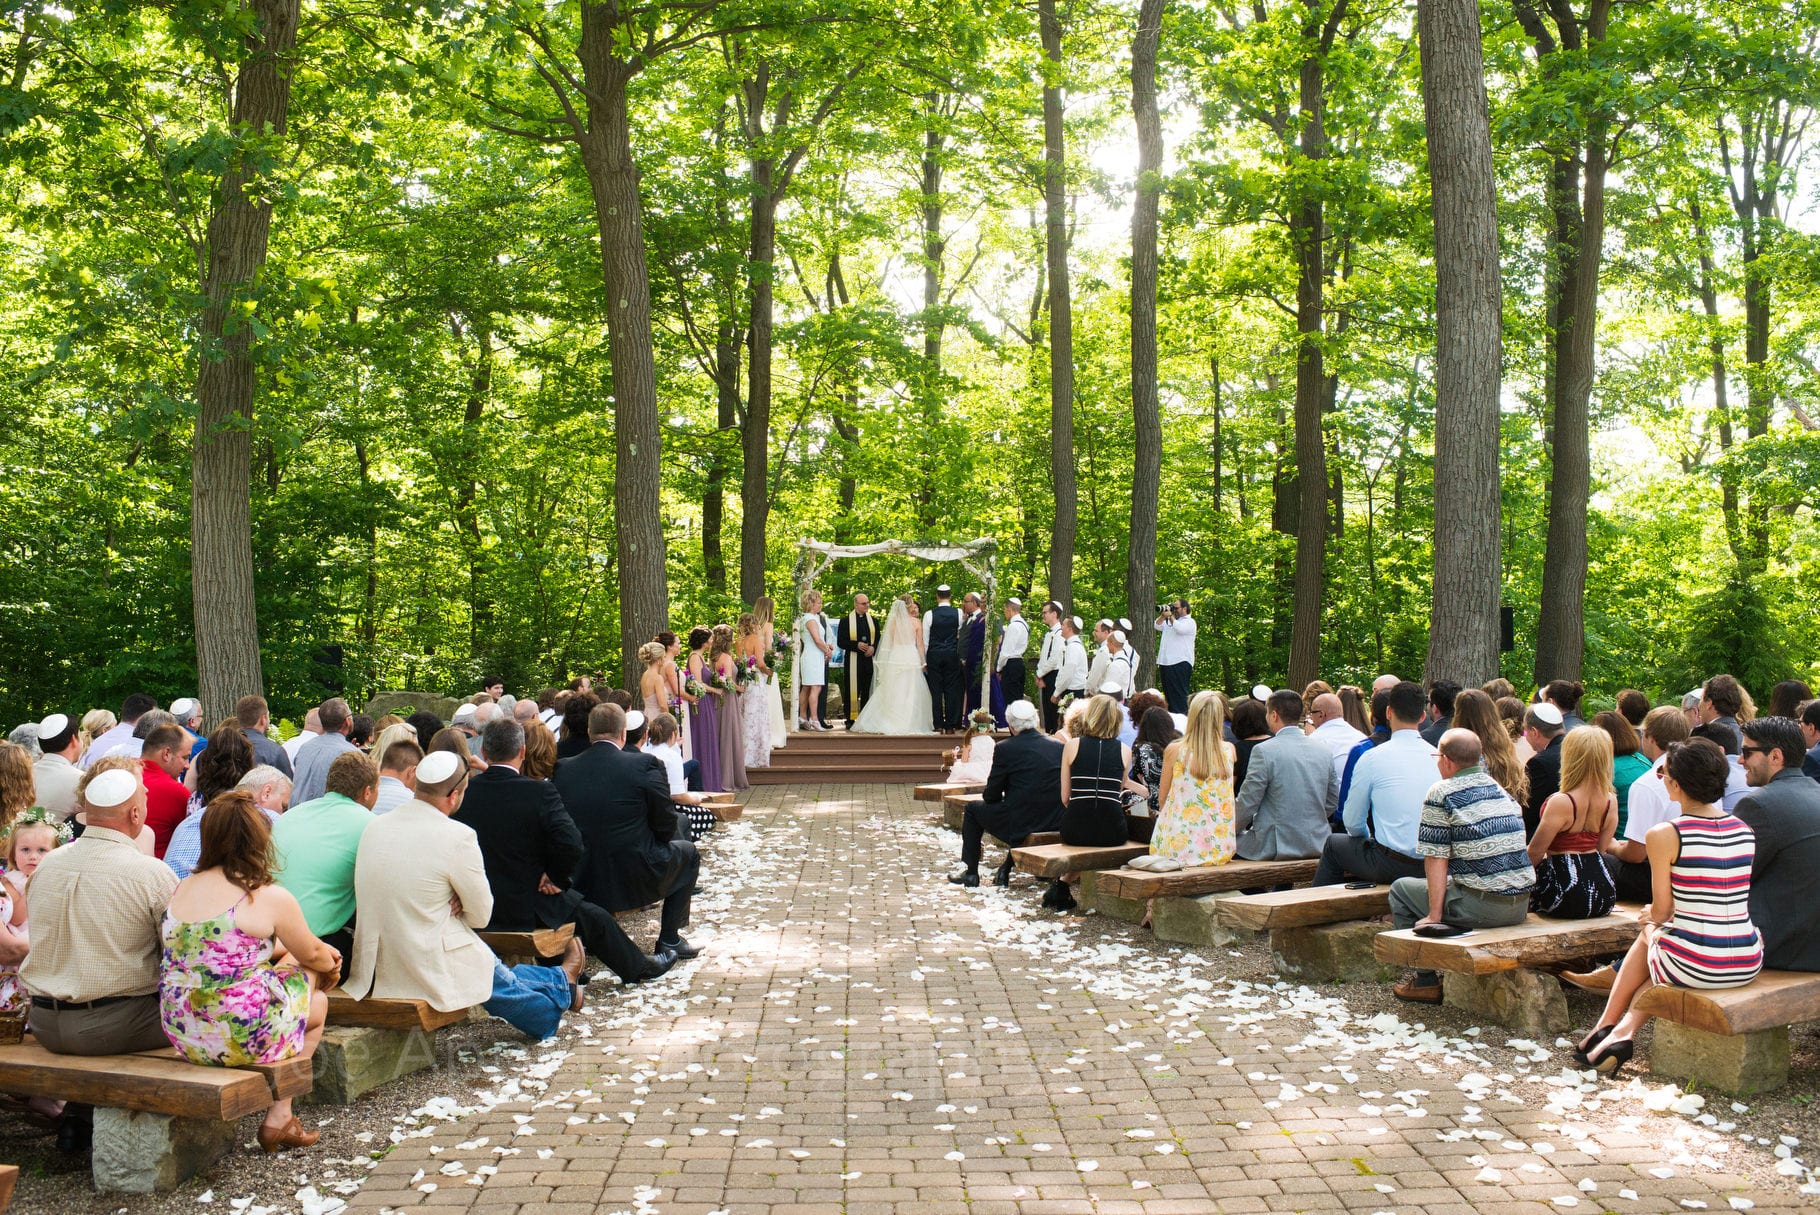 An overview from the rear of the Meadowoods wedding site during their Seven Springs Wedding.